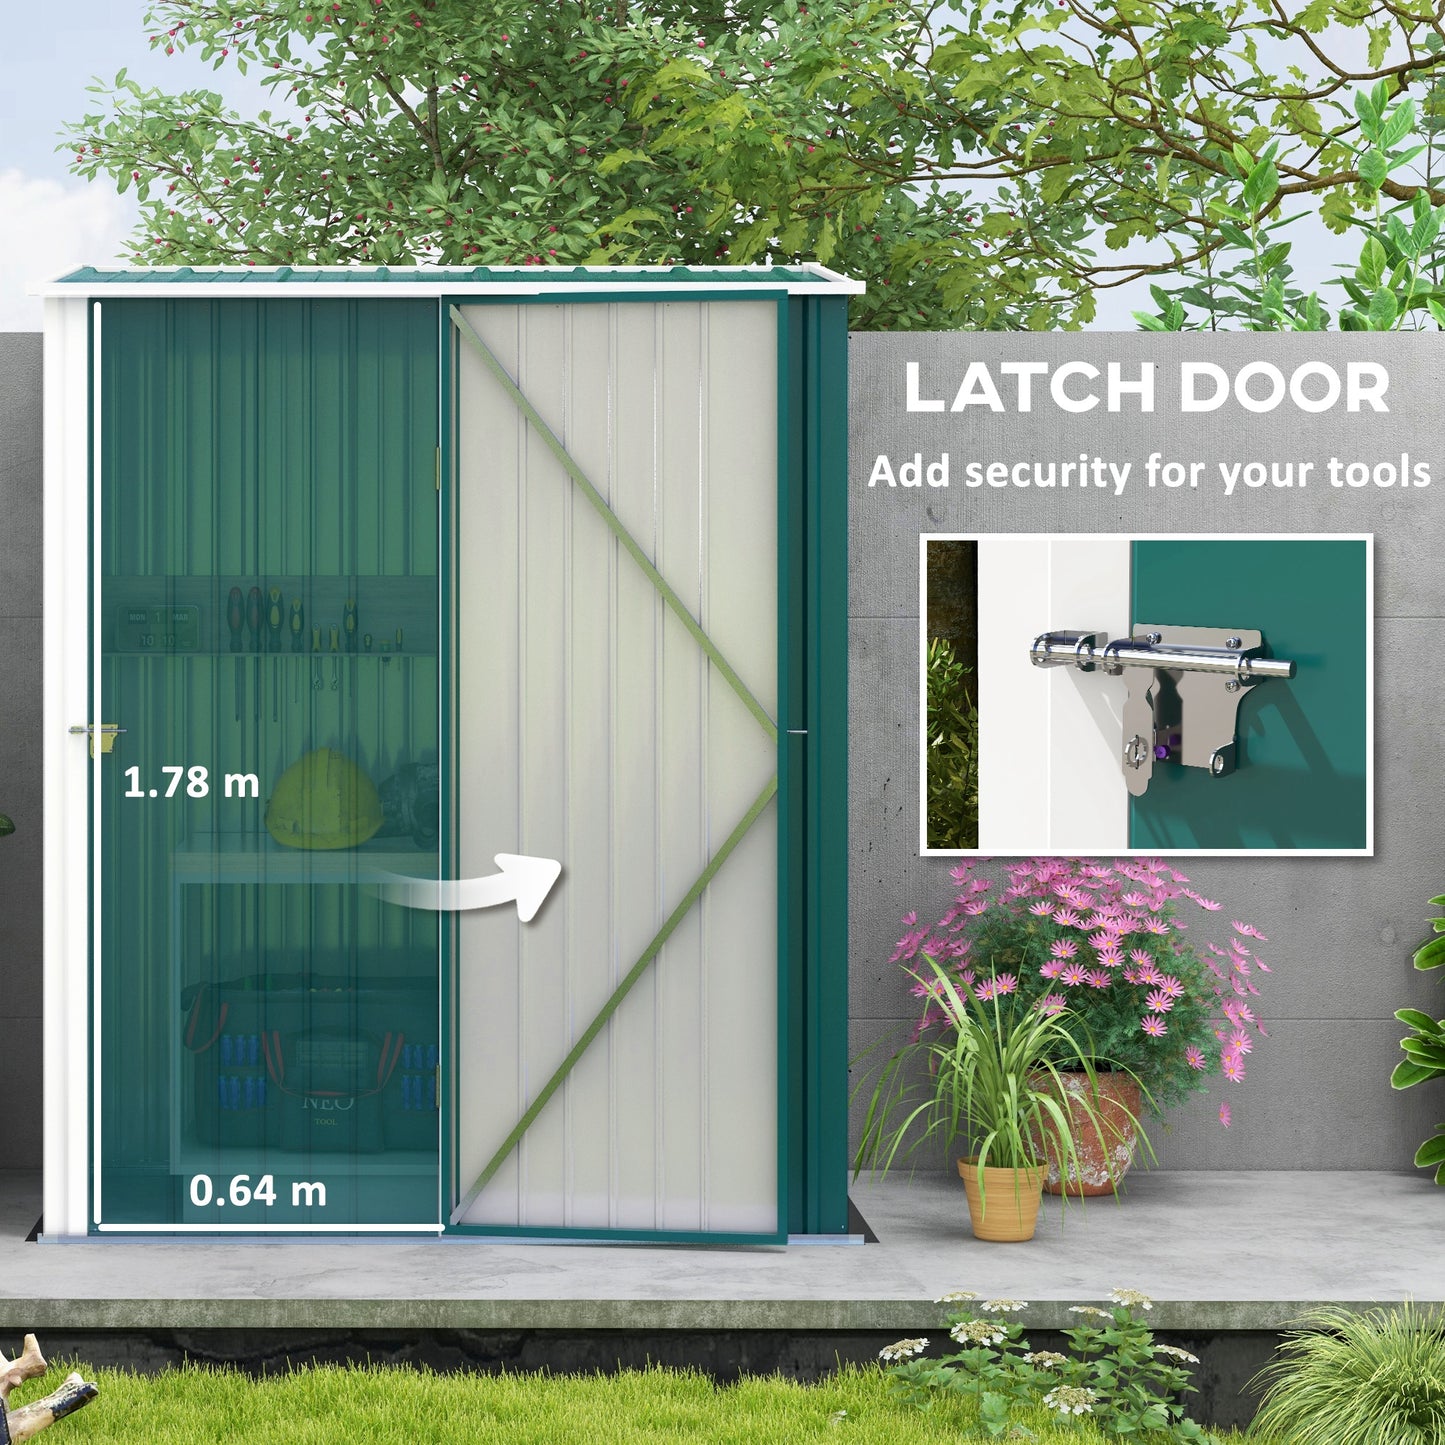 Outsunny Outdoor Storage Shed, Garden Metal Storage Shed w/ Single Door for Garden, Patio, Lawn, 5.3ft x 3.1ft, Green